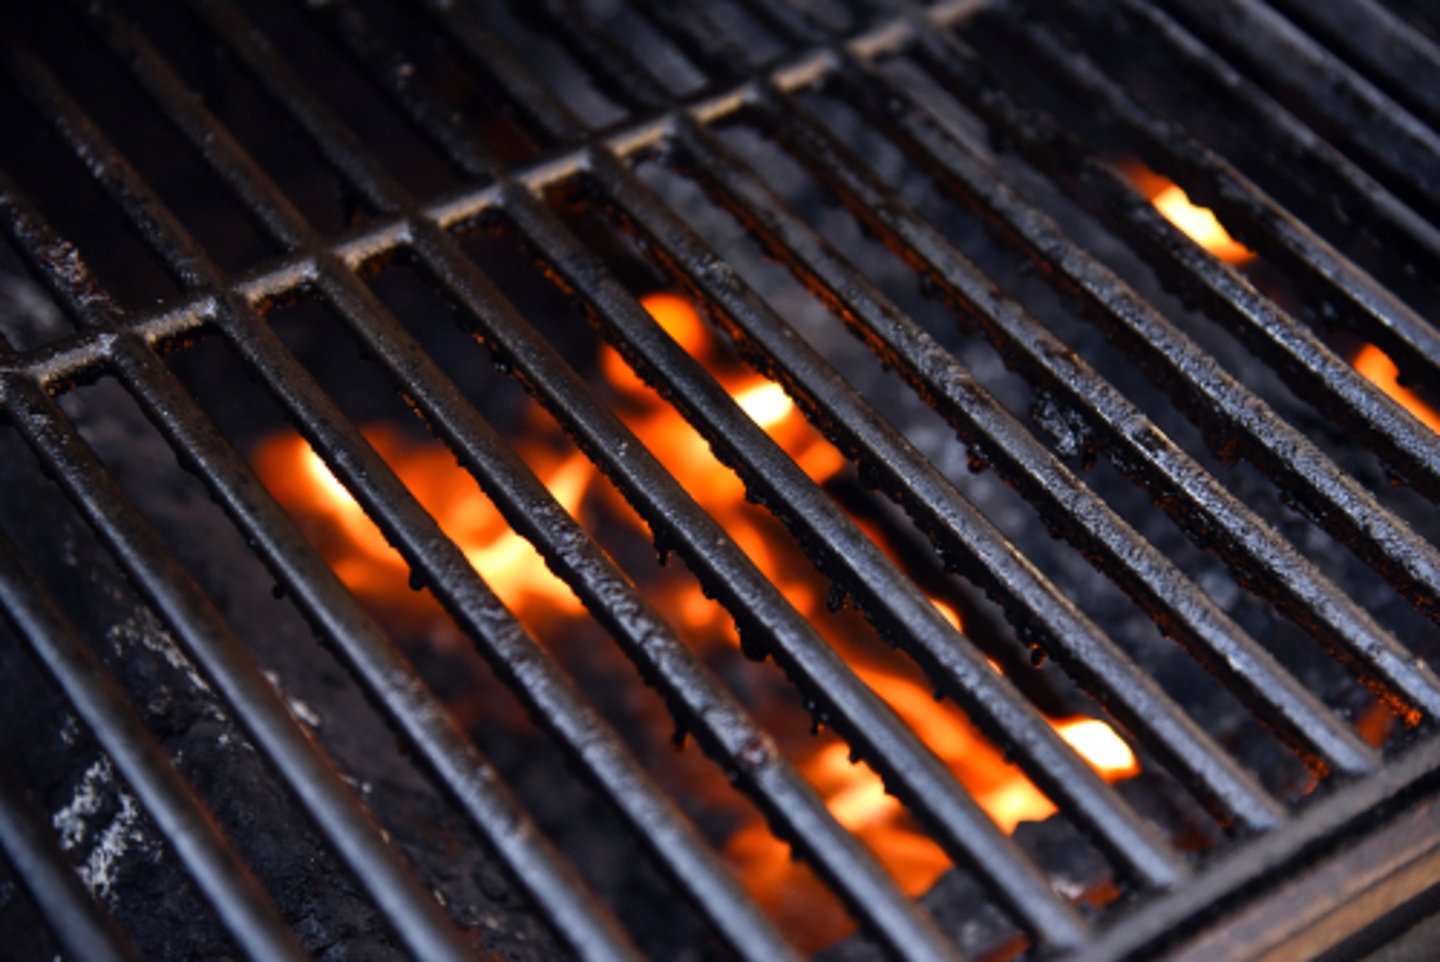 The Anatomy of a Gas Grill Parts Guide